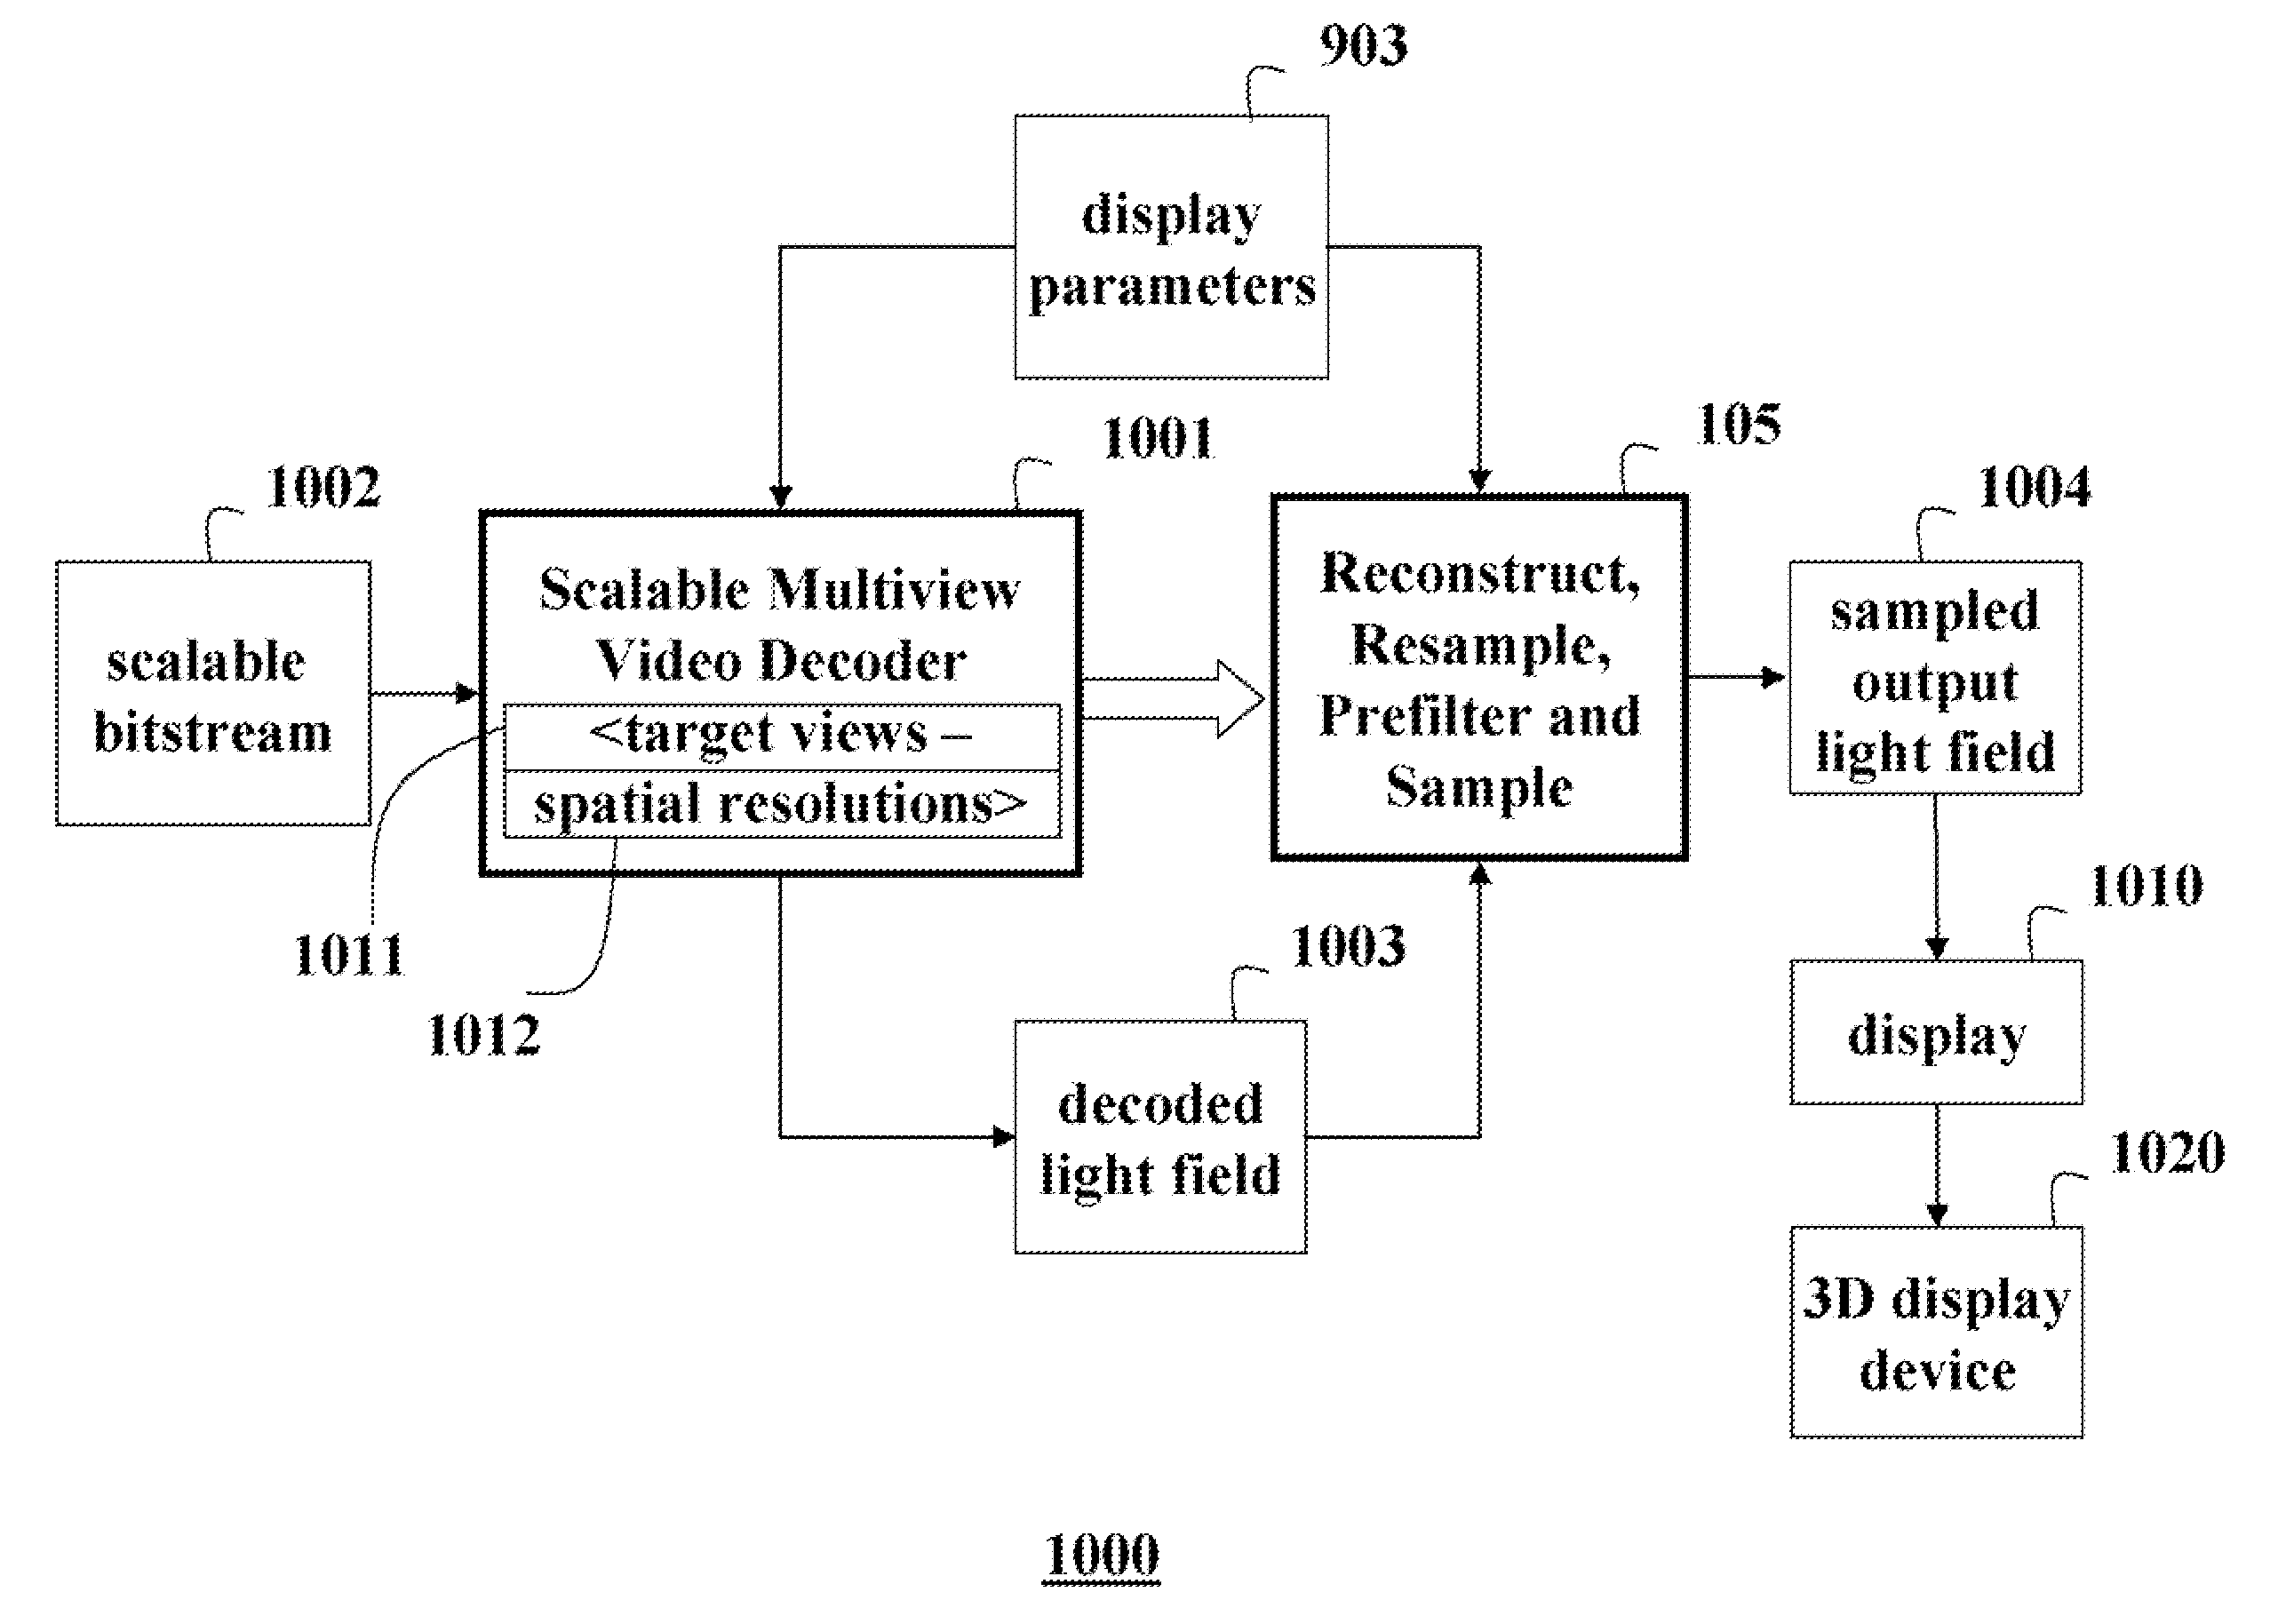 Method and System for Acquiring, Encoding, Decoding and Displaying 3D Light Fields